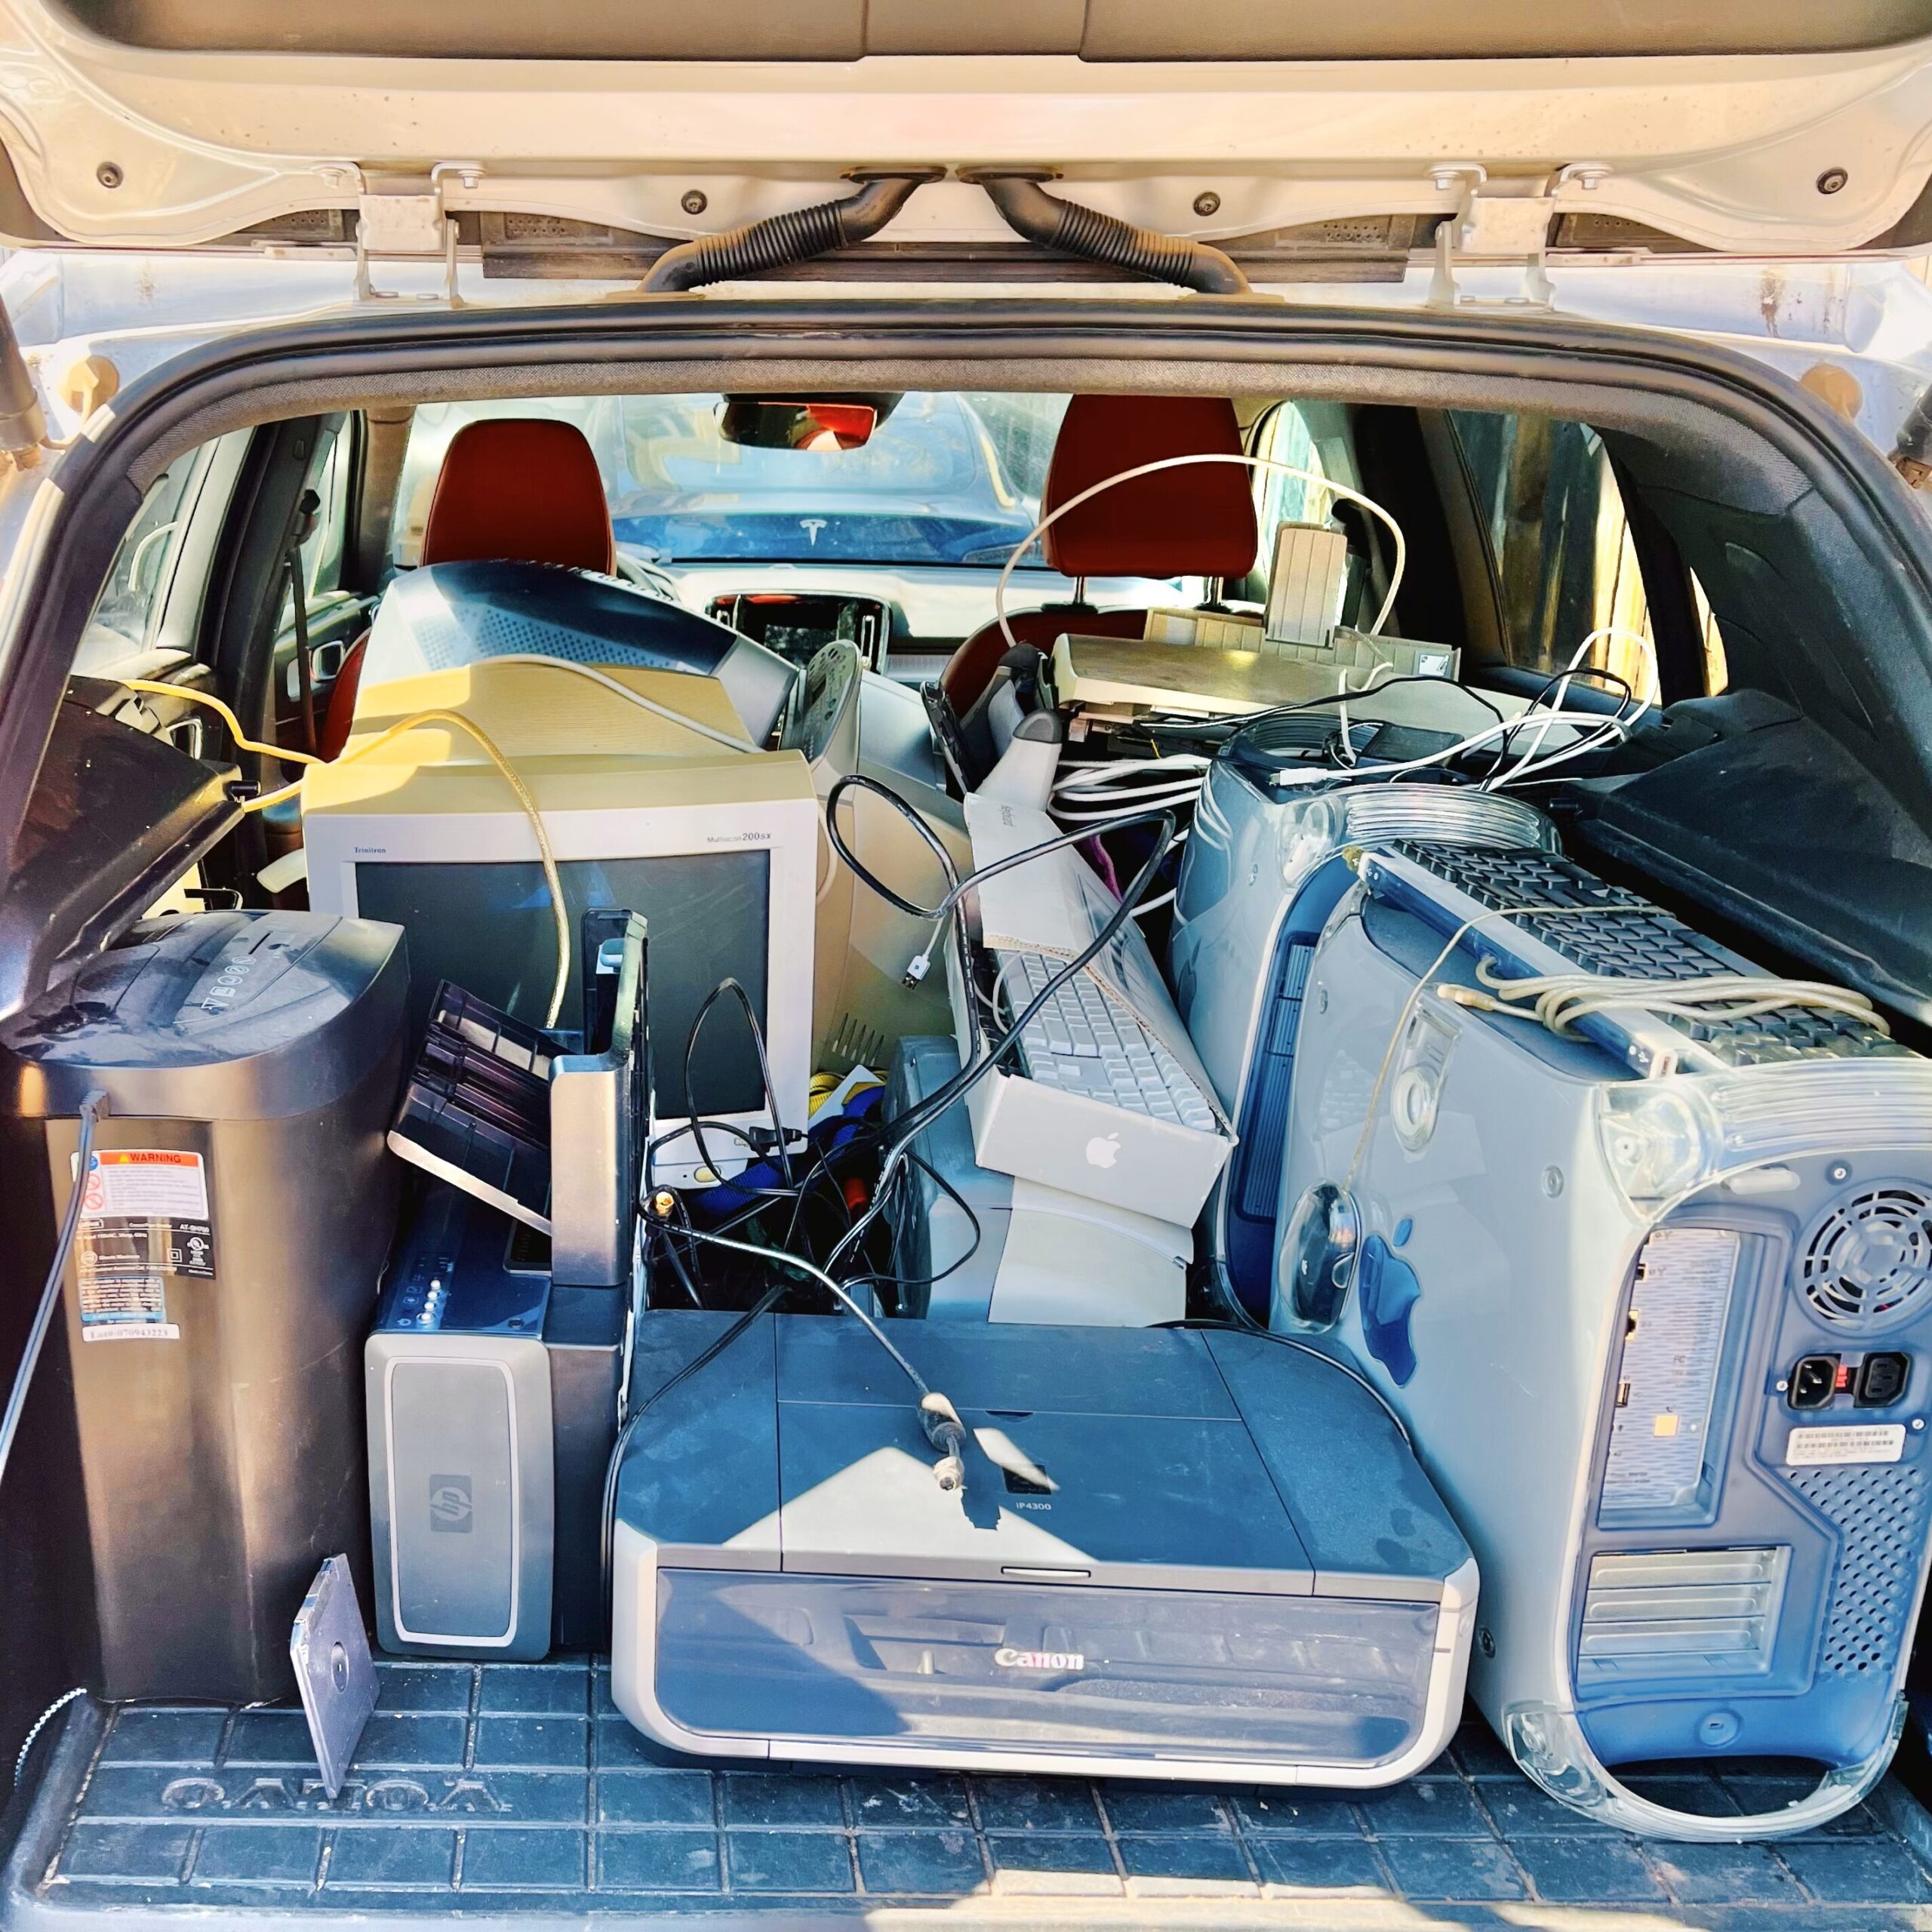 Electronics to recycle loaded up into the back of a car to take to a Colorado Springs recycling center